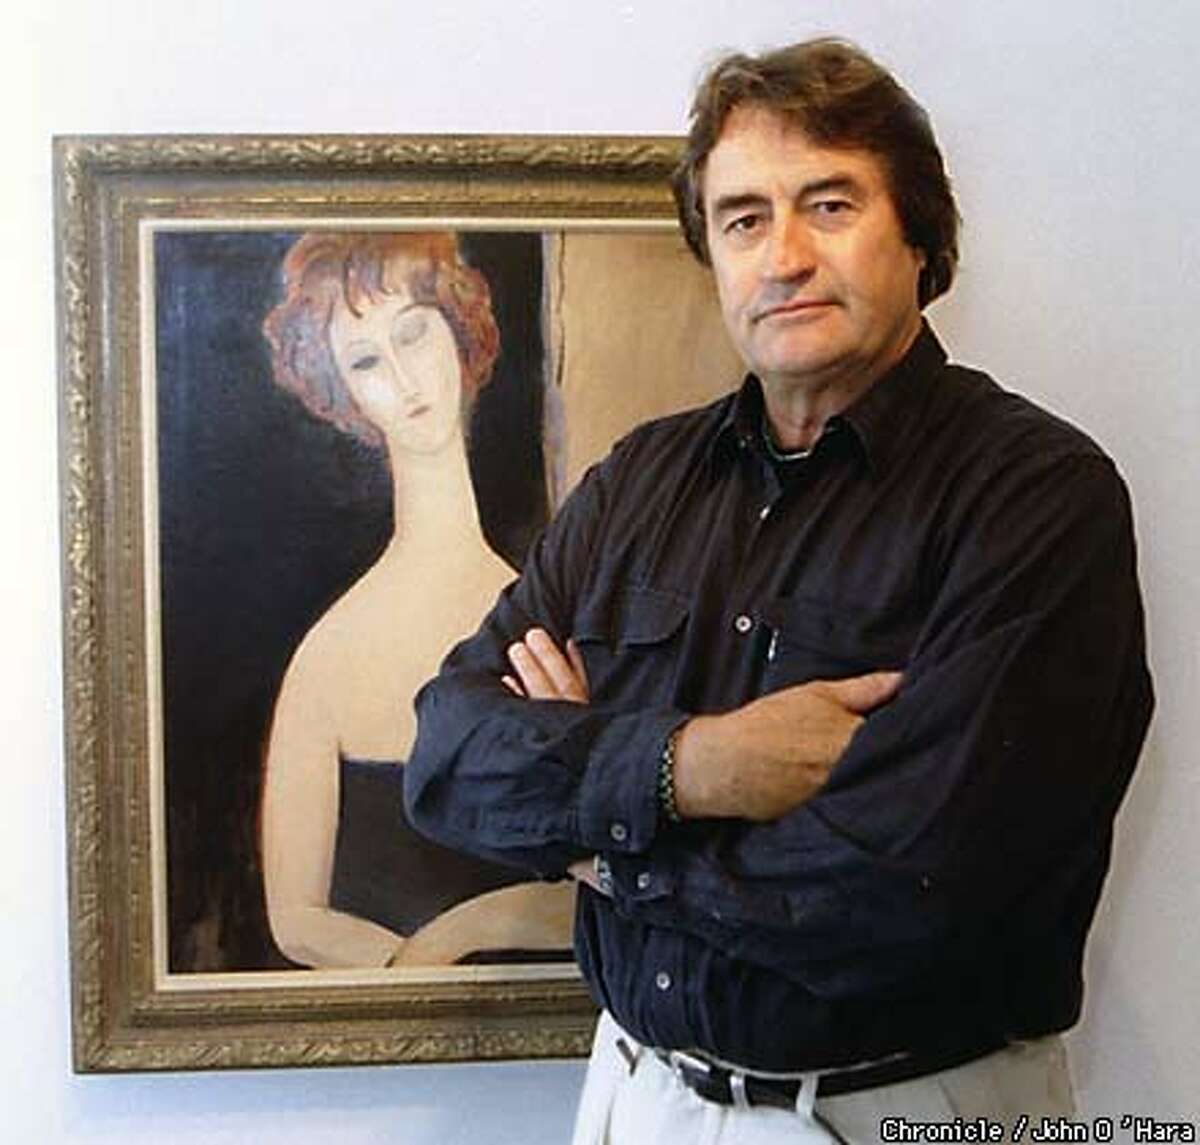 John Pyle owns a number of Elmyr de Hory's fakes, including this forged Modigliani. Chronicle Photo by John O'Hara